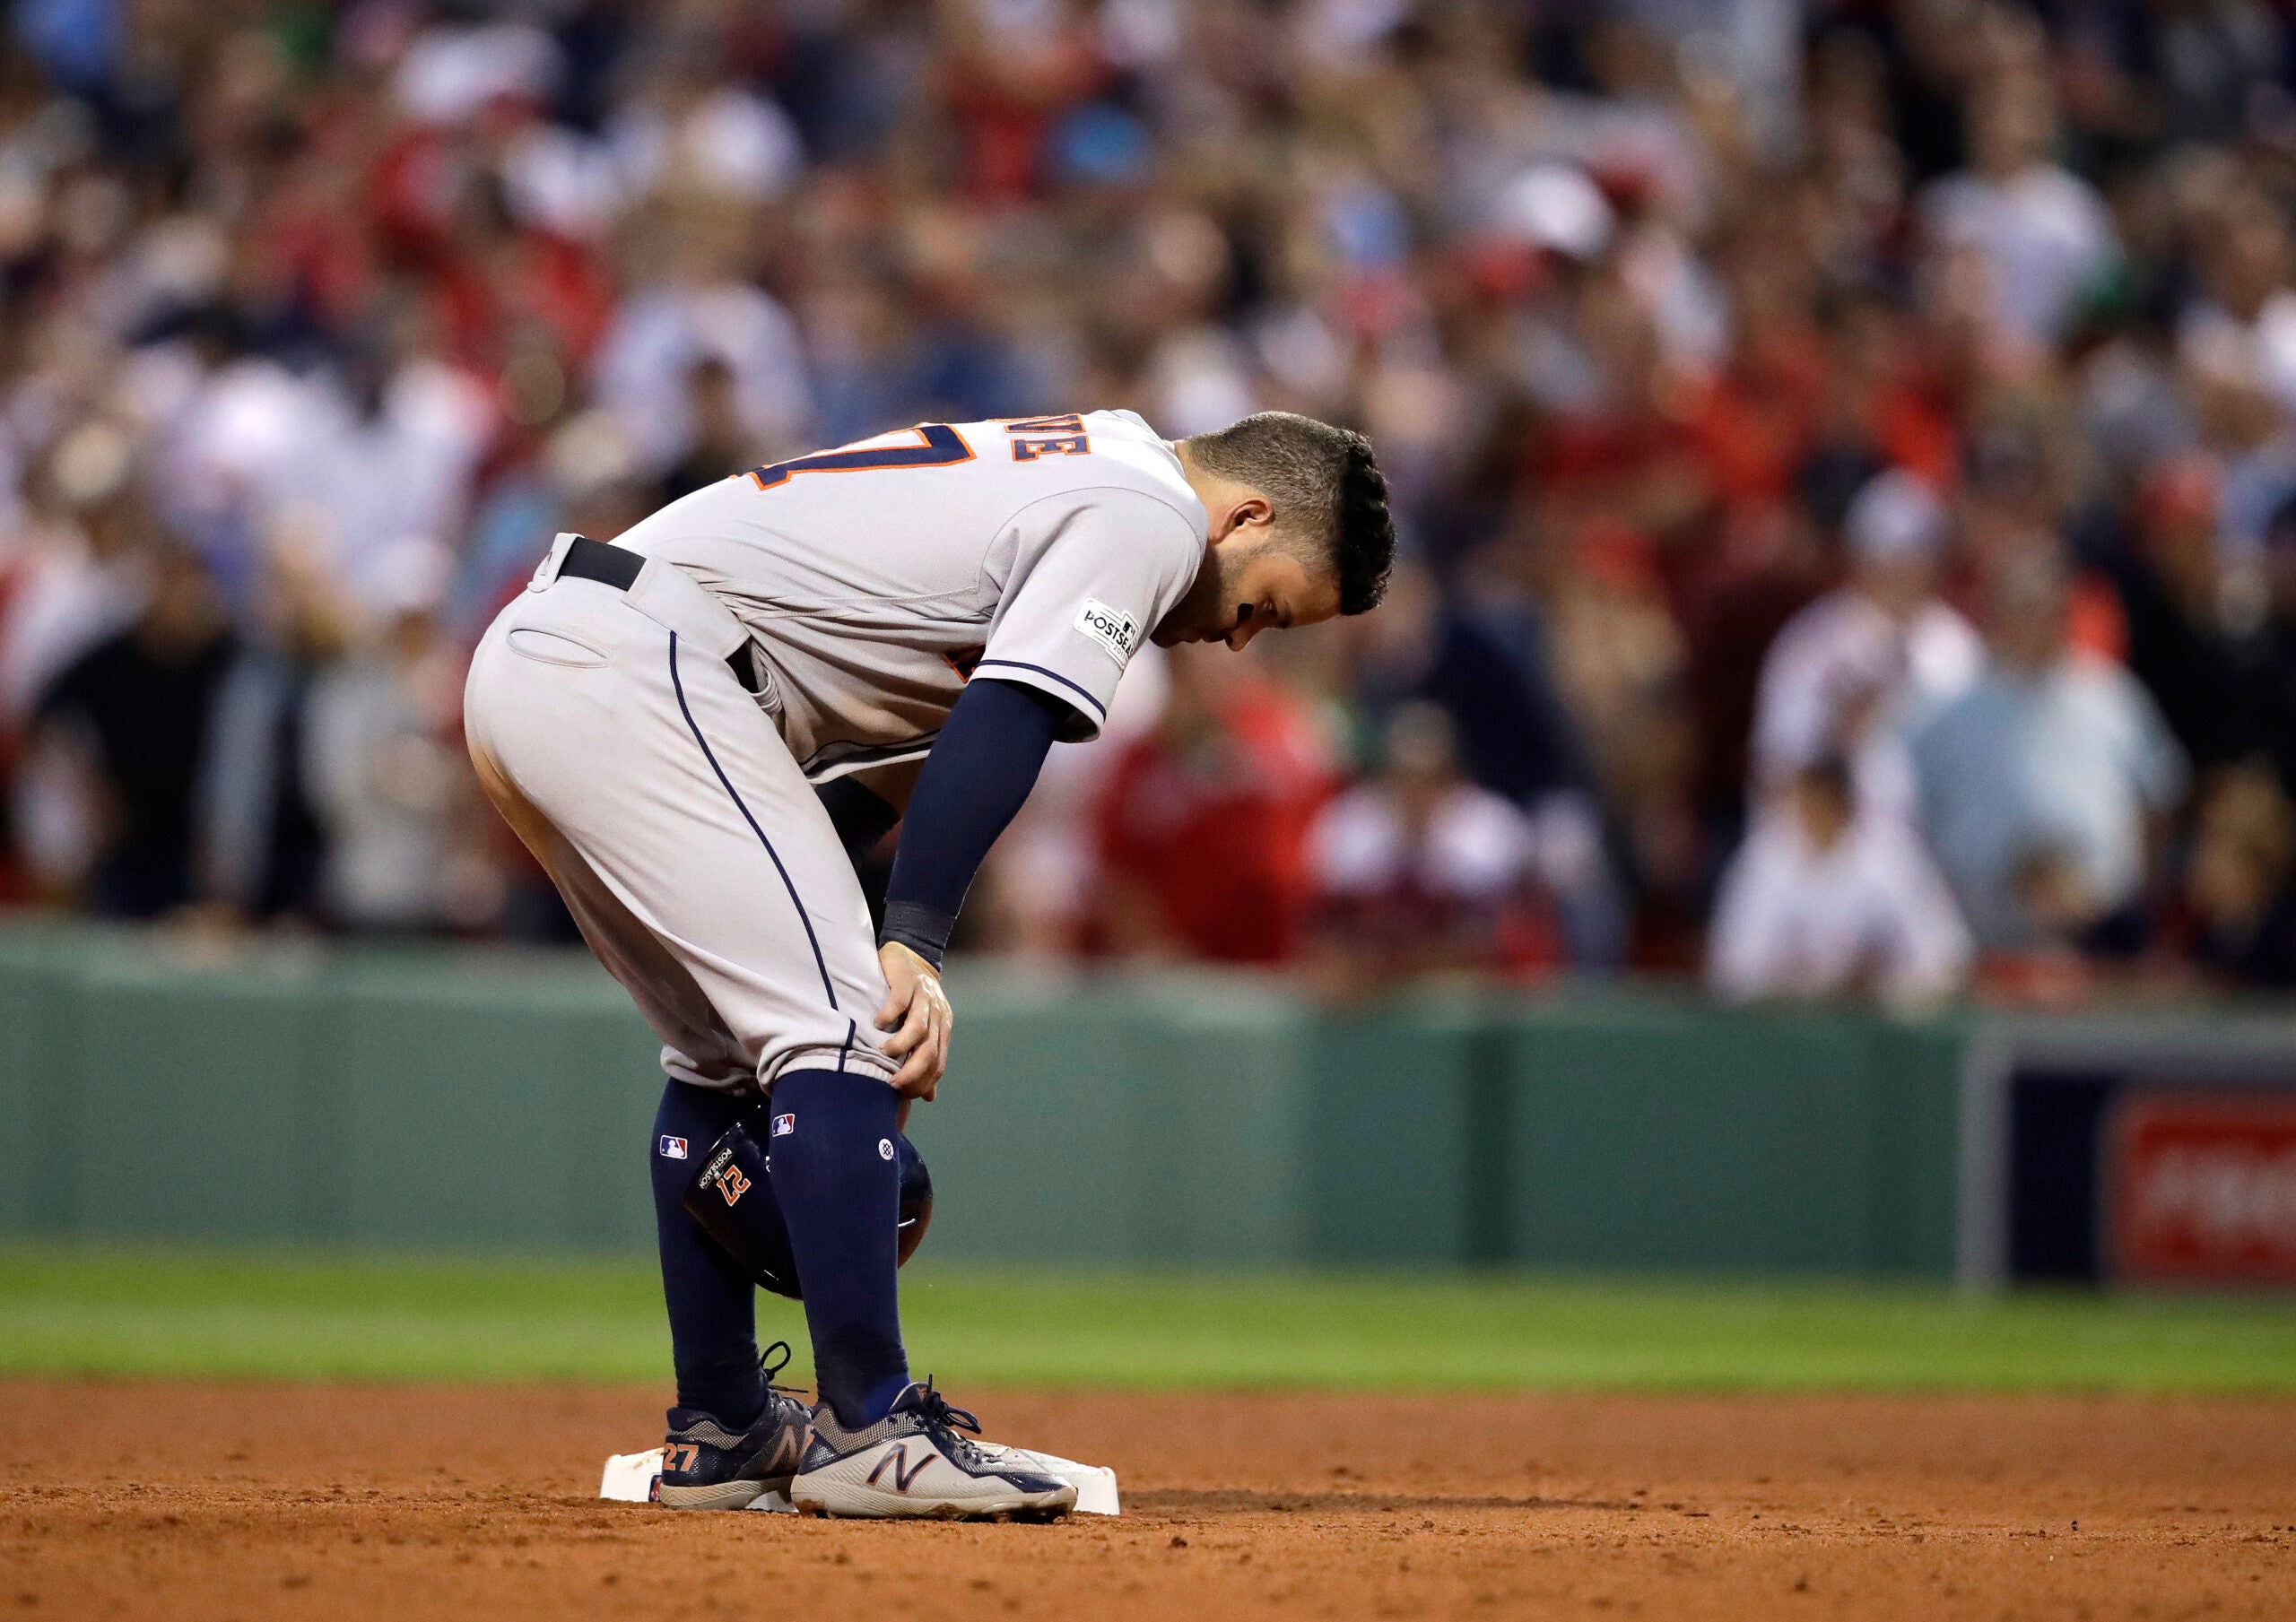 Astros down Red Sox, earn first sweep at Fenway Park